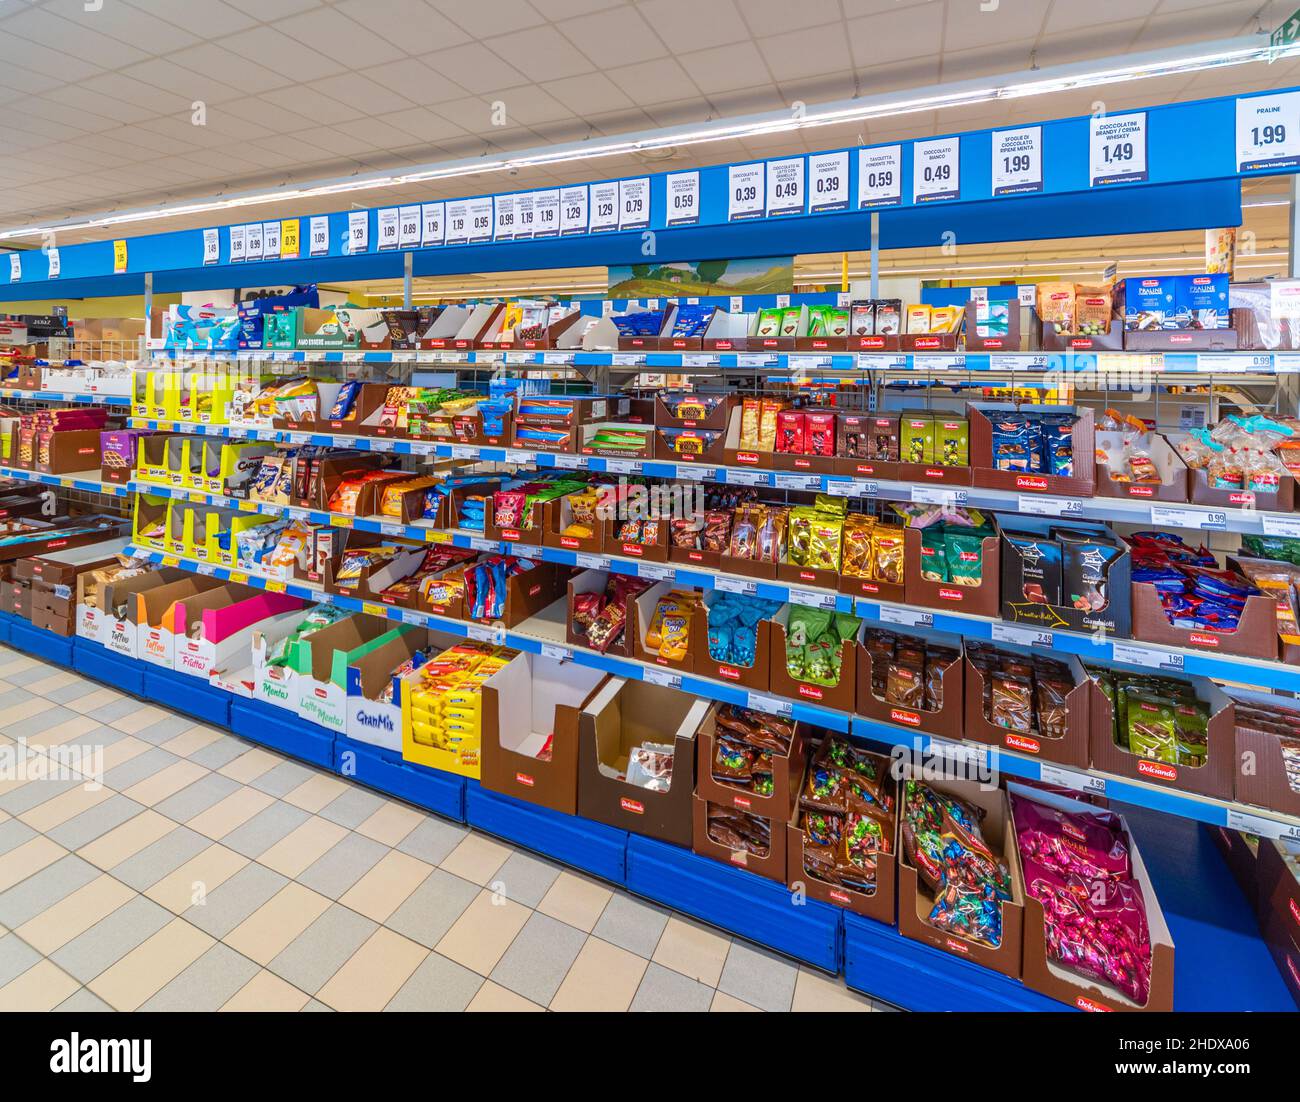 Fossano, Italy - October 29, 2021: shelves, for the sale of sweets, chocolate, snacks, candies, inside Eurospin discount supermarket. It is an Italian Stock Photo